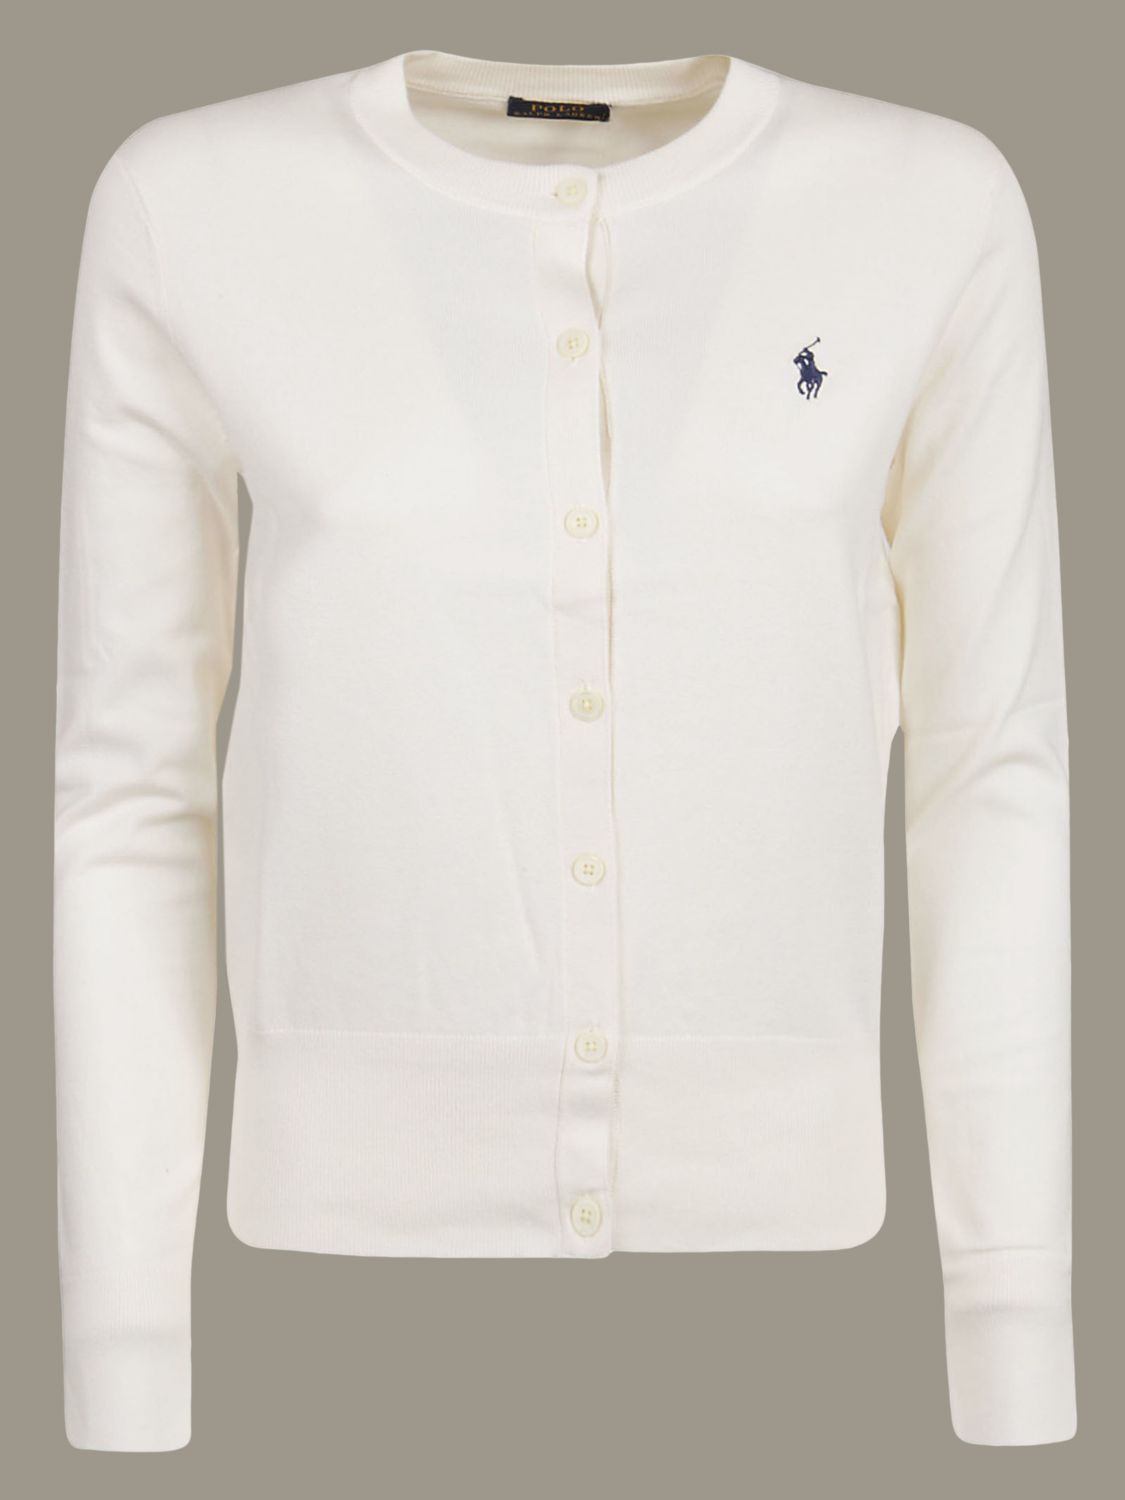 Polo Ralph Lauren Outlet: sweater for woman - Cream | Polo Ralph Lauren  sweater 211784759 online on 